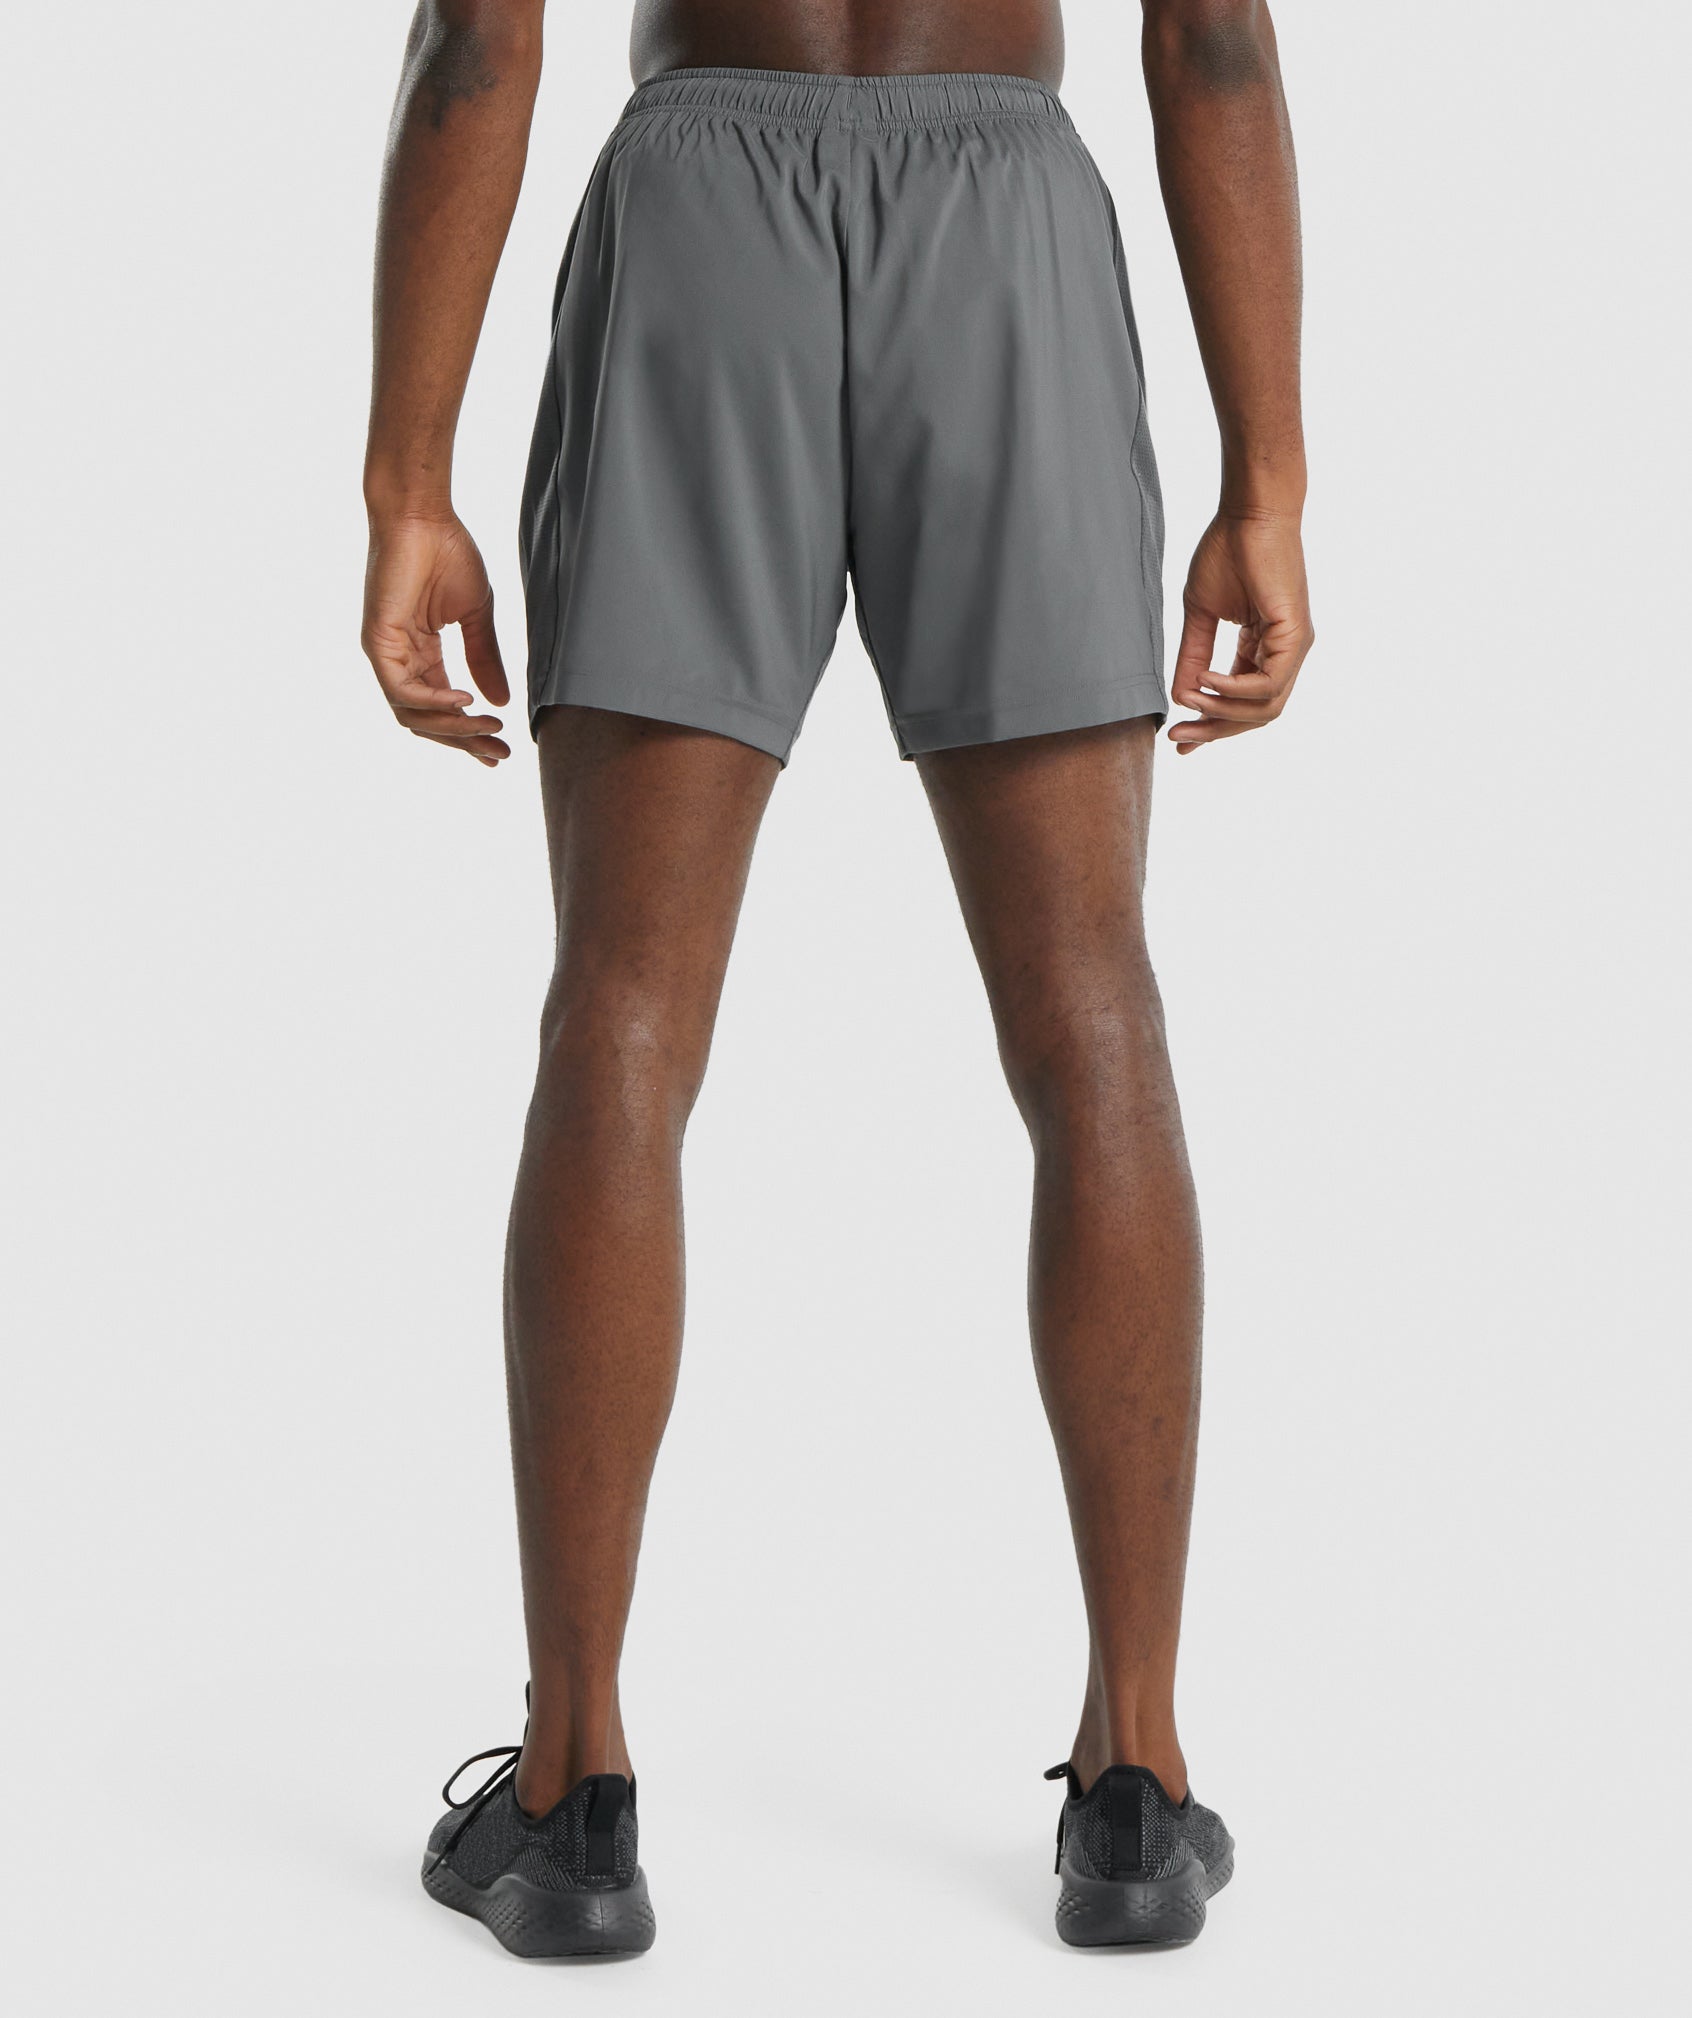 Sport Shorts in Charcoal - view 2